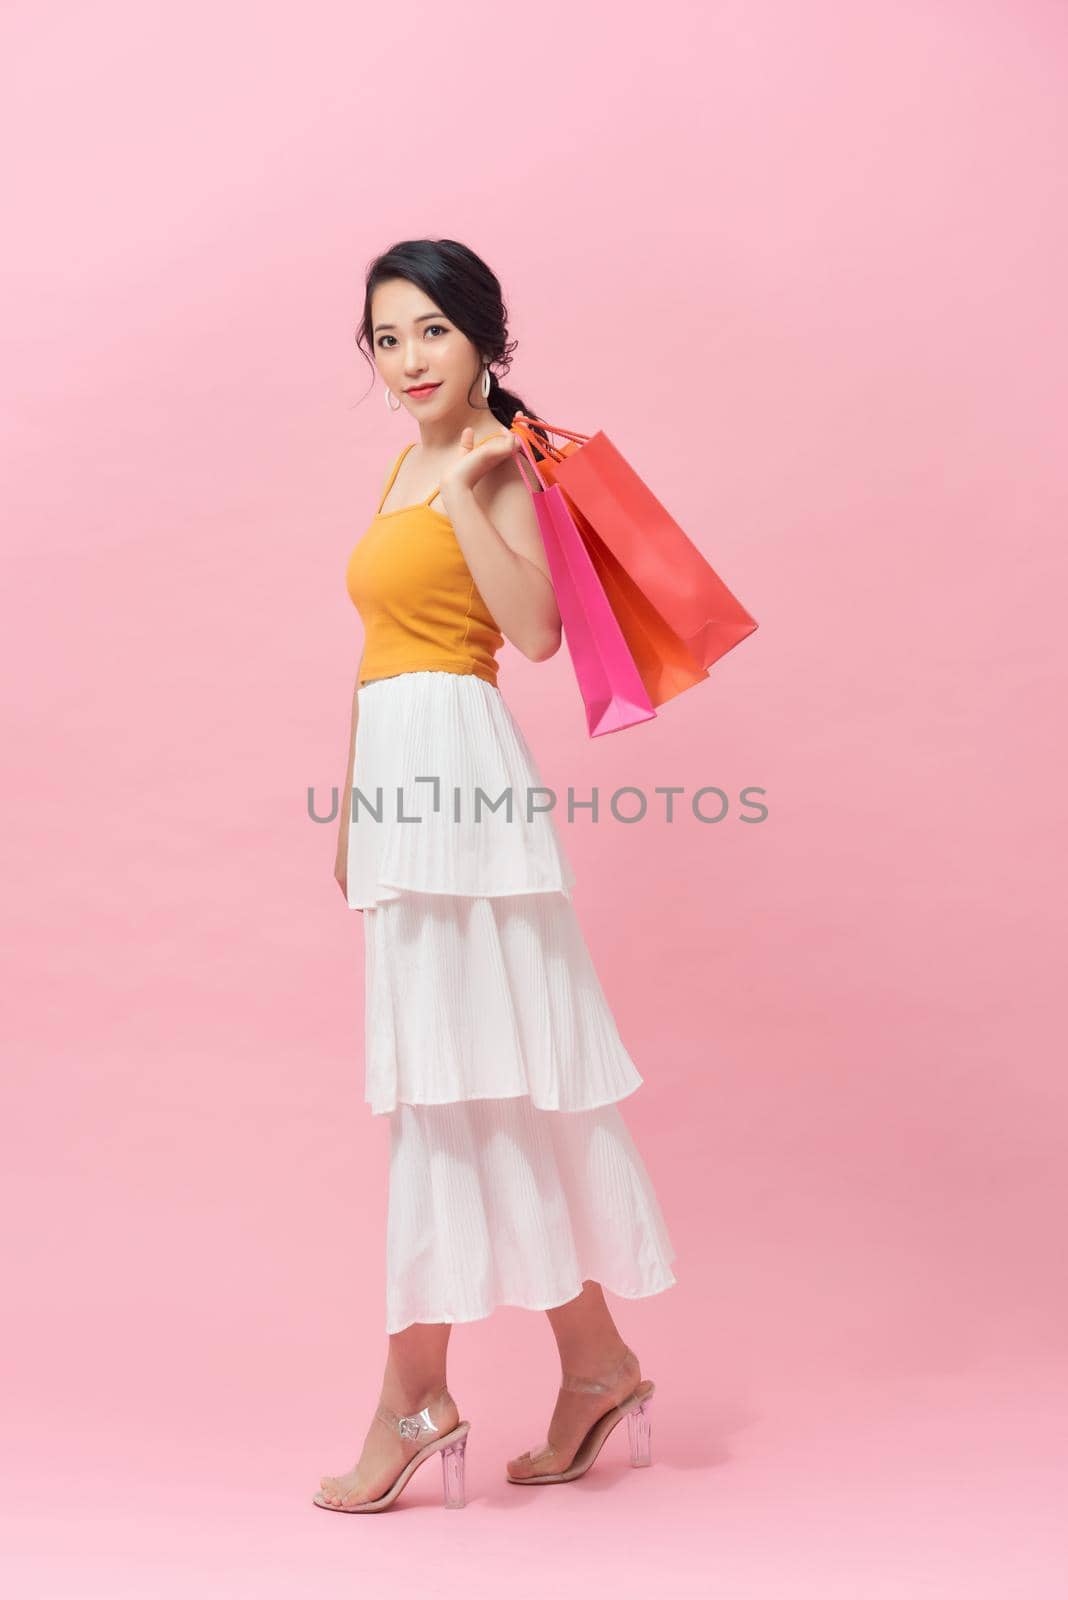 full length view of cheerful, fashionable woman holding colorfull shopping bags and smiling on pink background by makidotvn